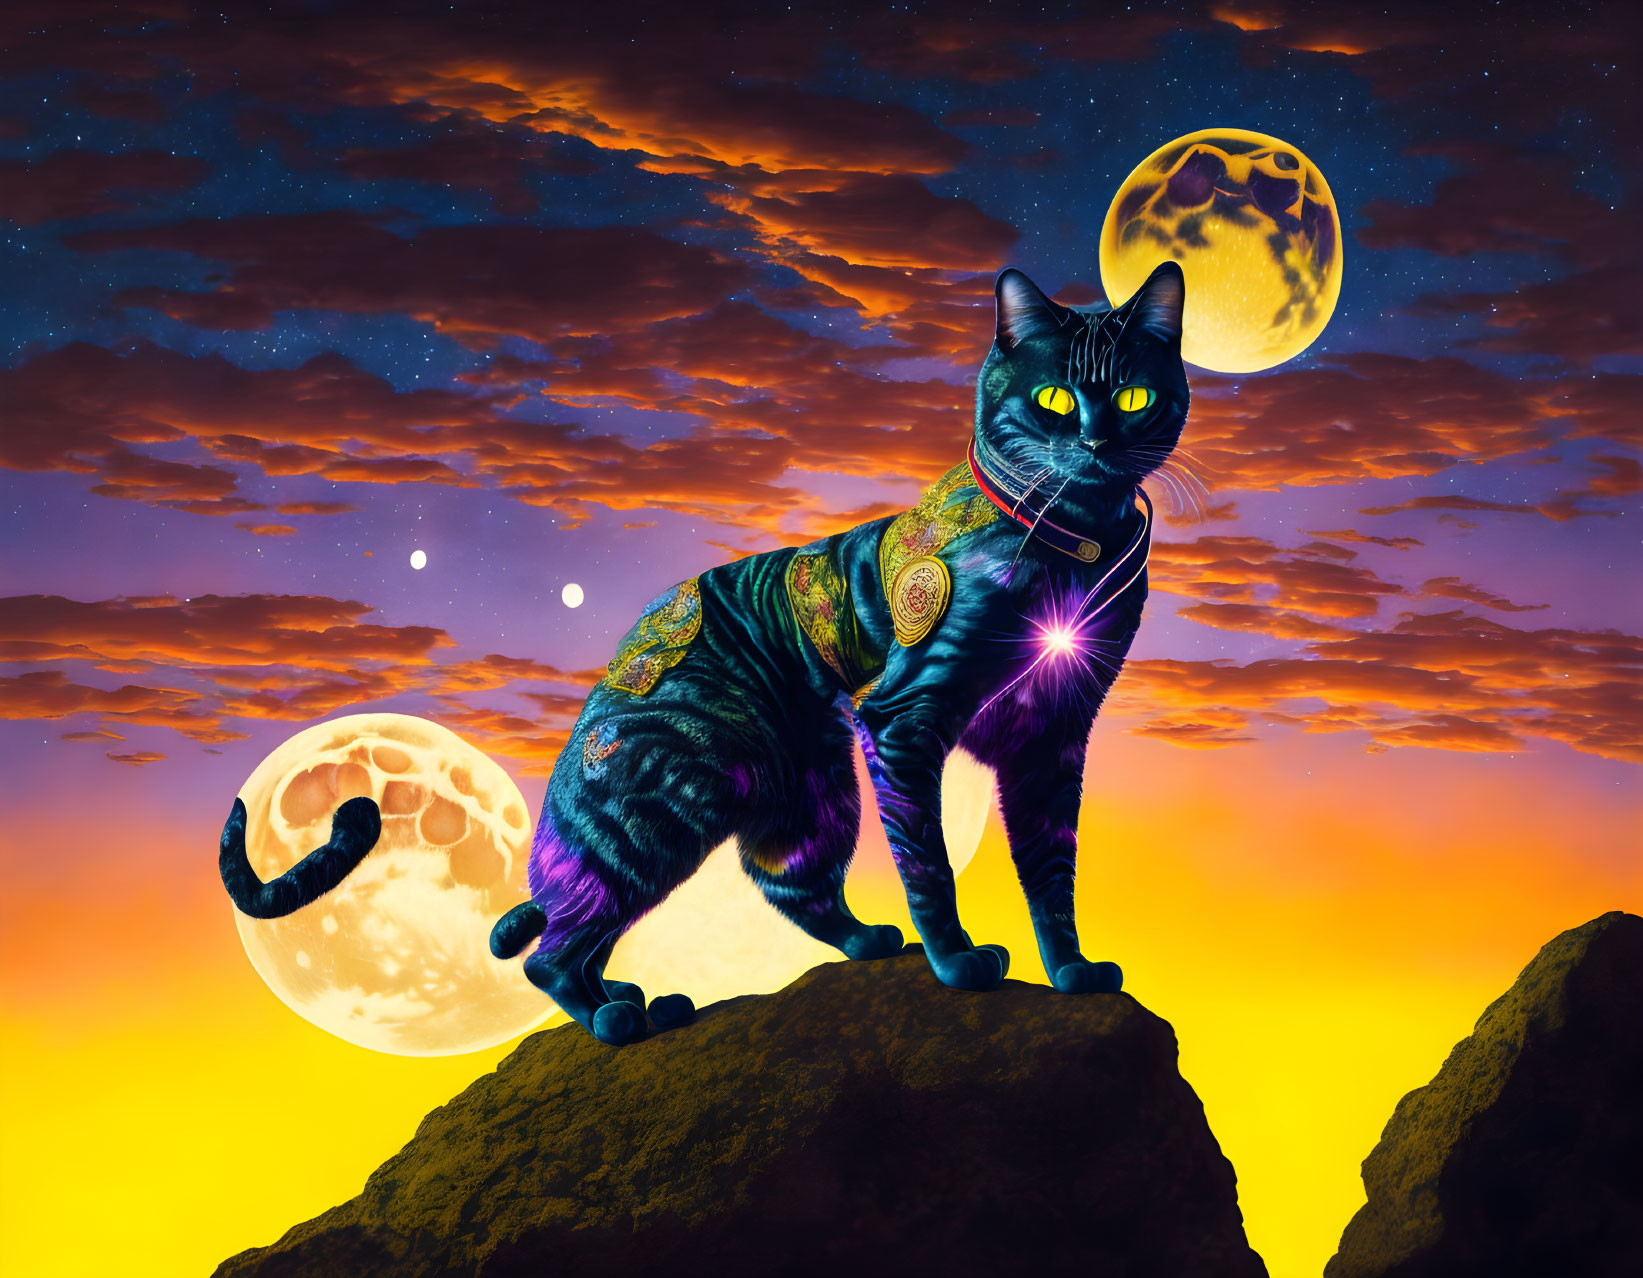 Starry cosmic cat on rock under surreal sky with two moons